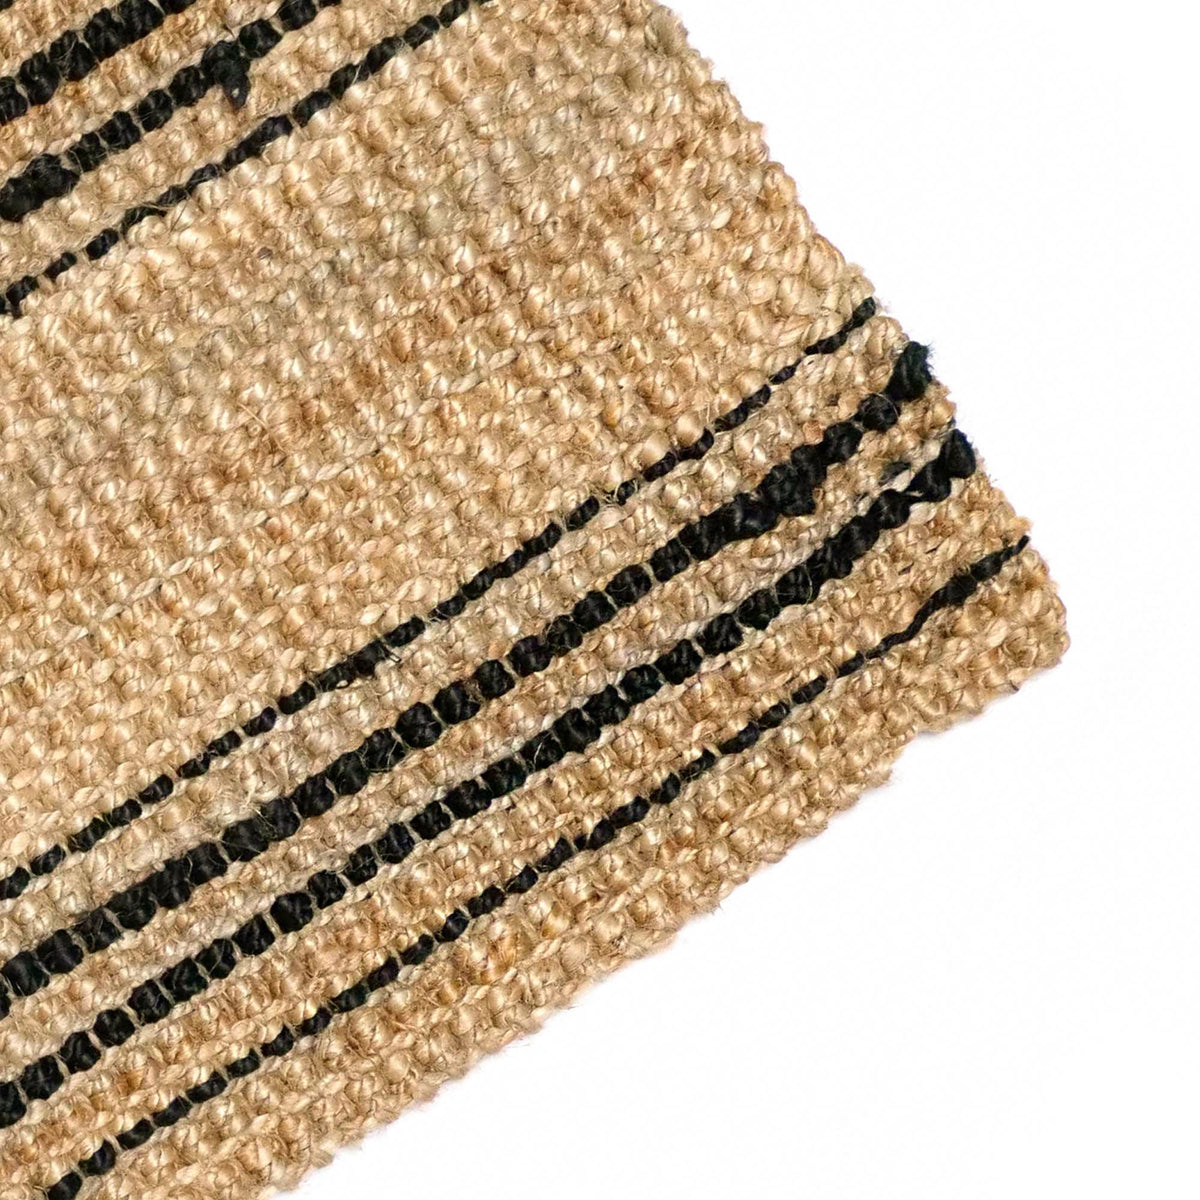 Lines of Life - Artisan Luxe Rug - Handwoven Jute Carpet - Organic Natural Sustainable